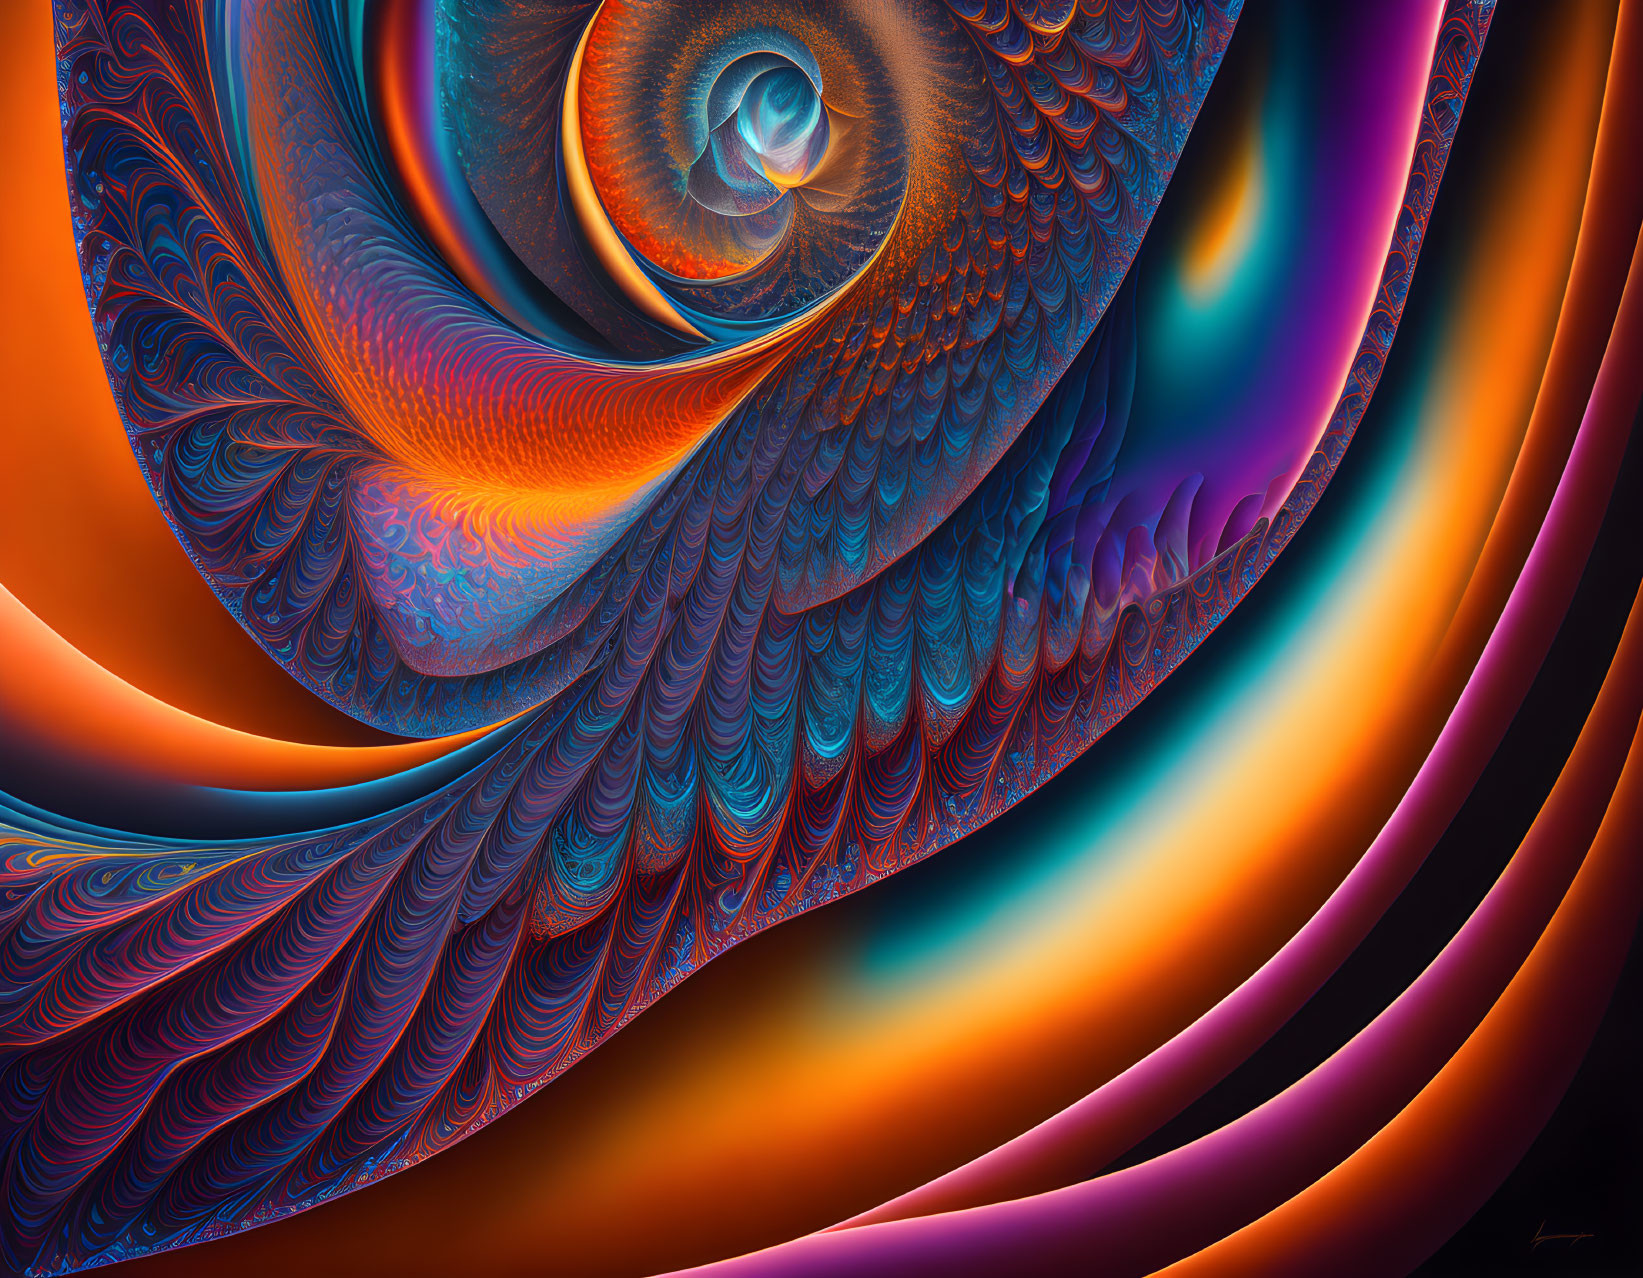 Colorful fractal image resembling peacock feather in oranges, blues, and purples